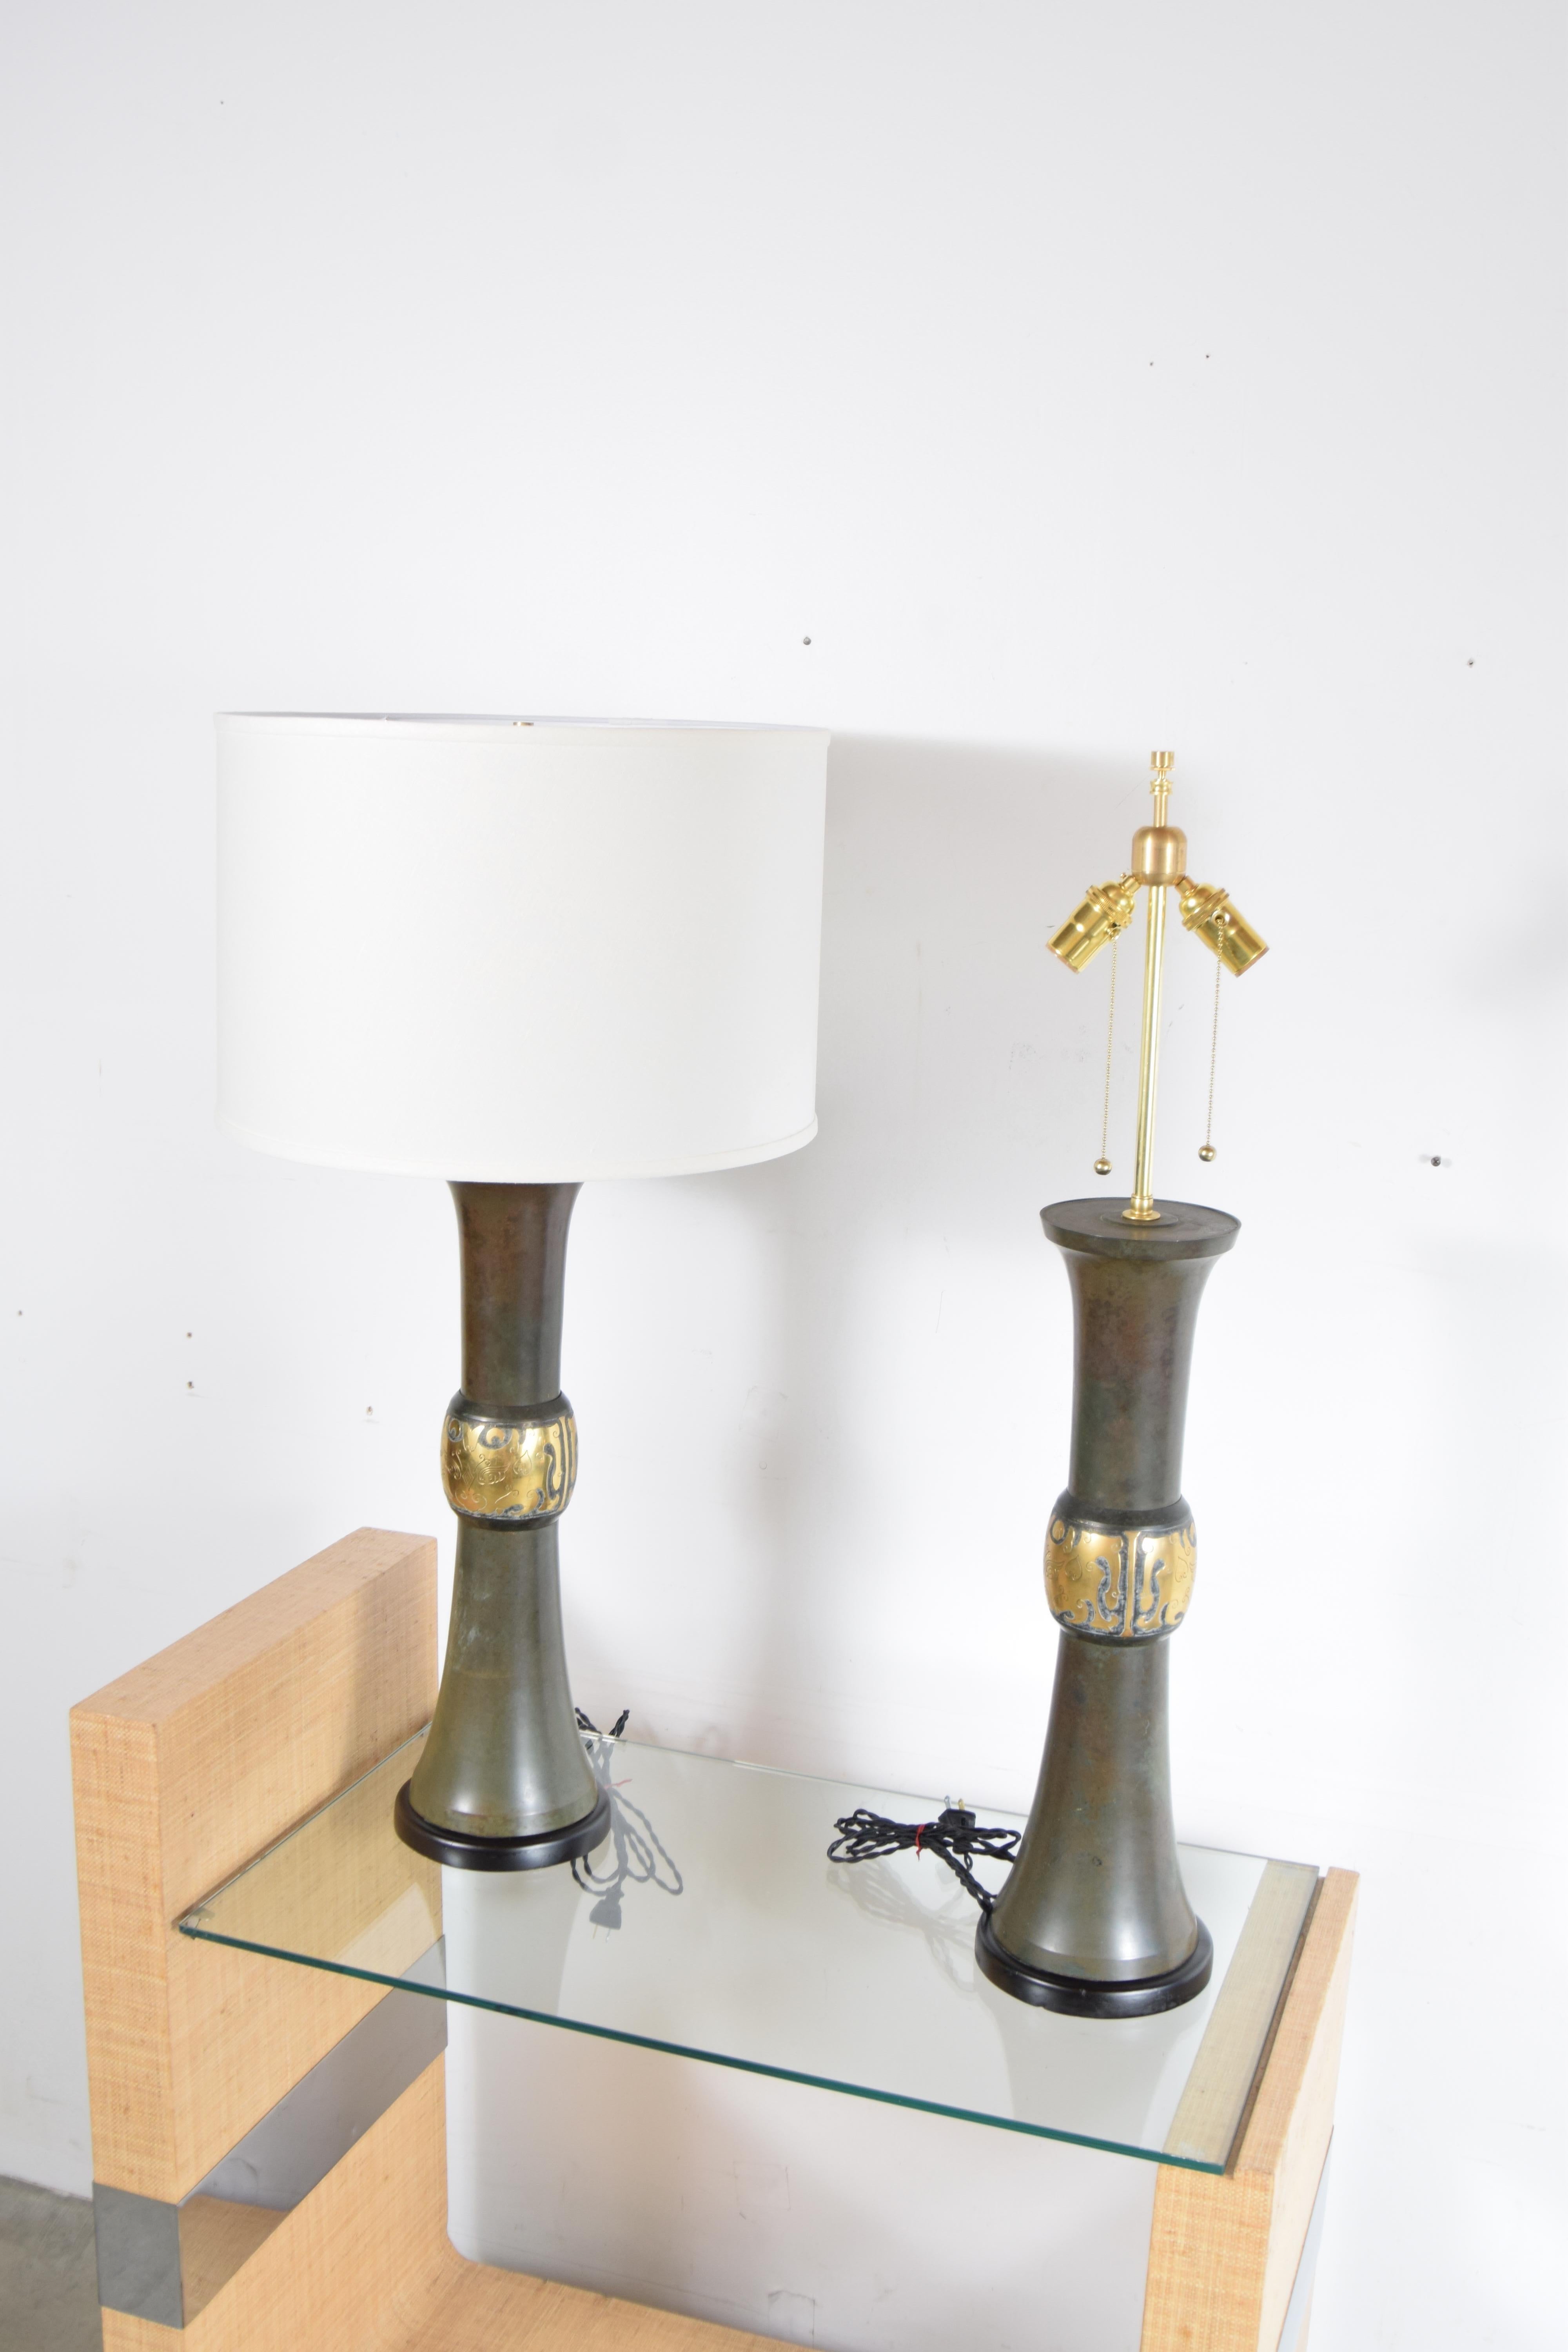 Pair of bronze and brass, Asian motif lamps, circa 1955. Lamps have been completely re-wired, and new top of the line brass hardware has been added, as has brand new shades. Lamps stand 35 1/2